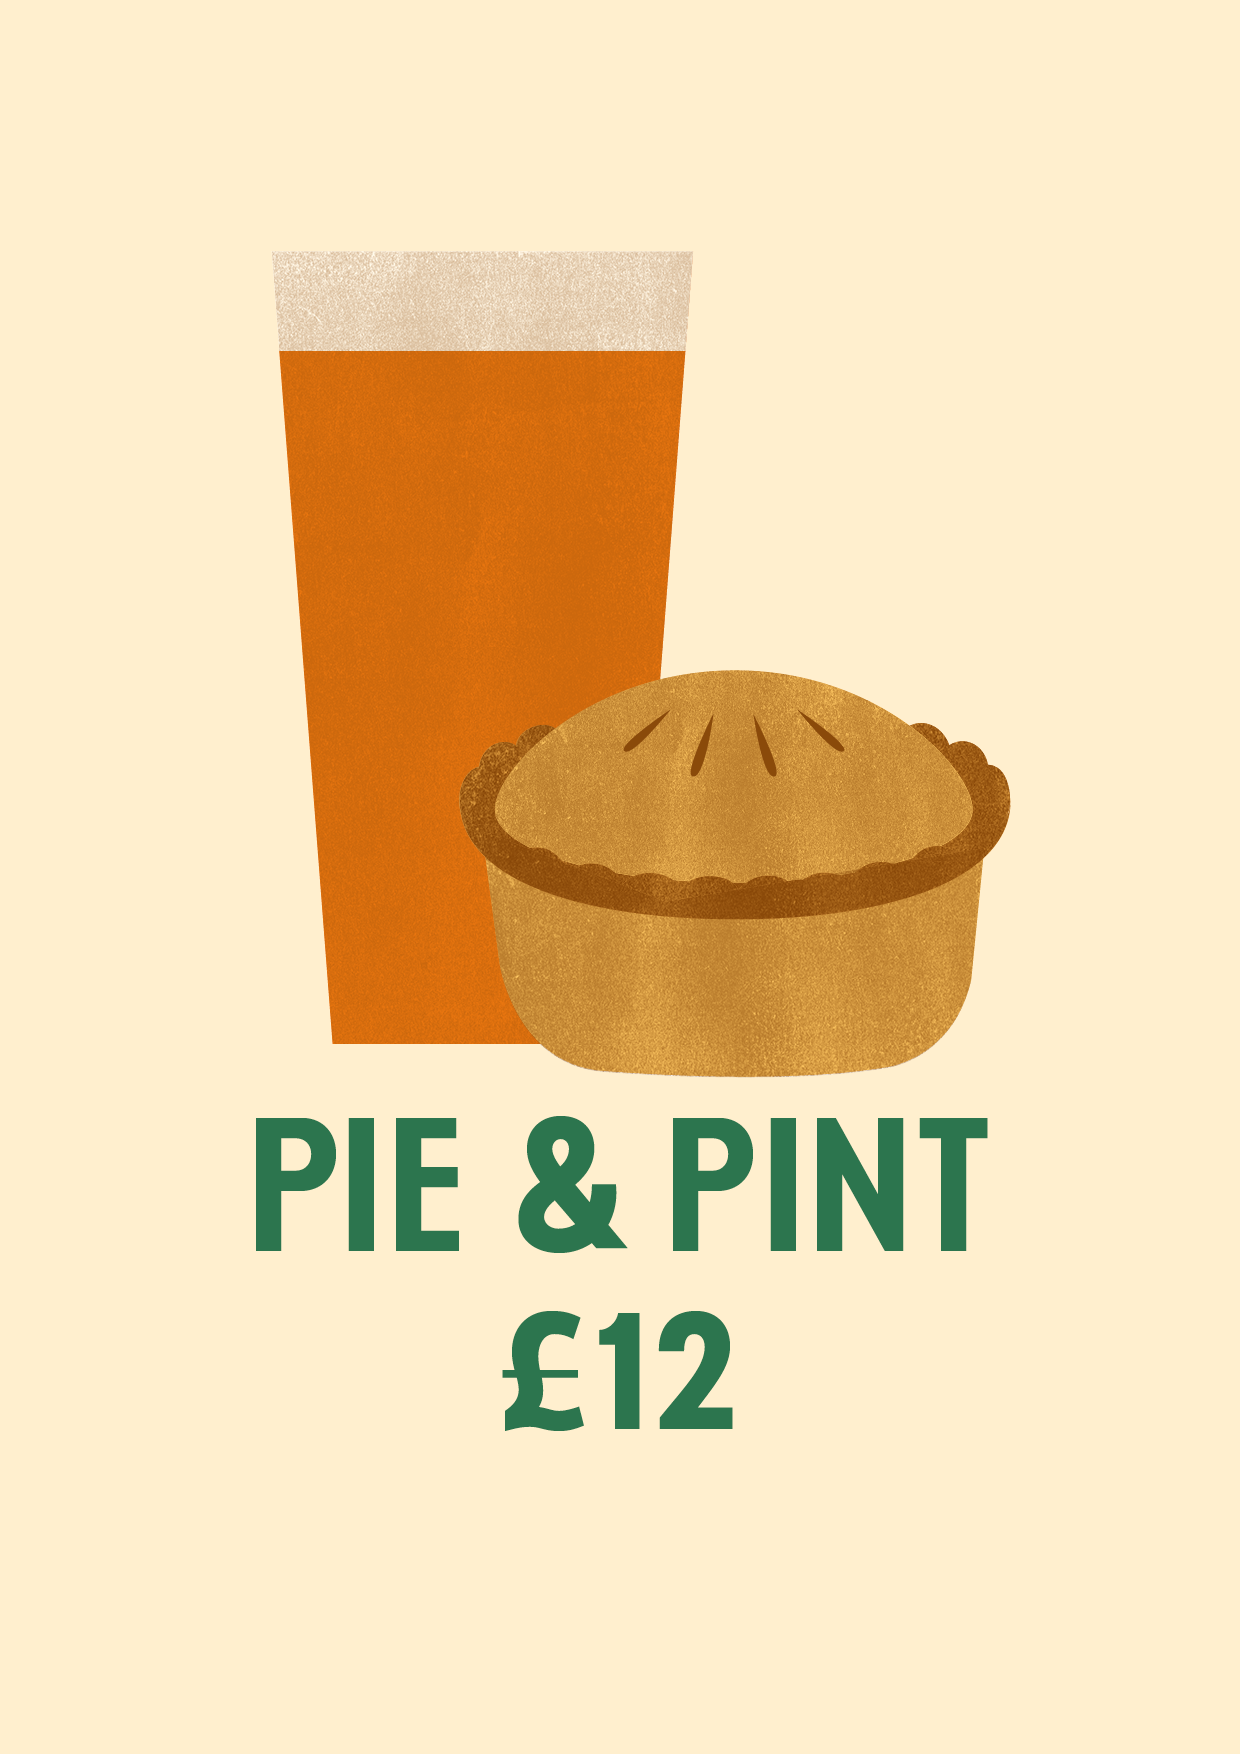 Pie Wednesday at The Waggon and Horses